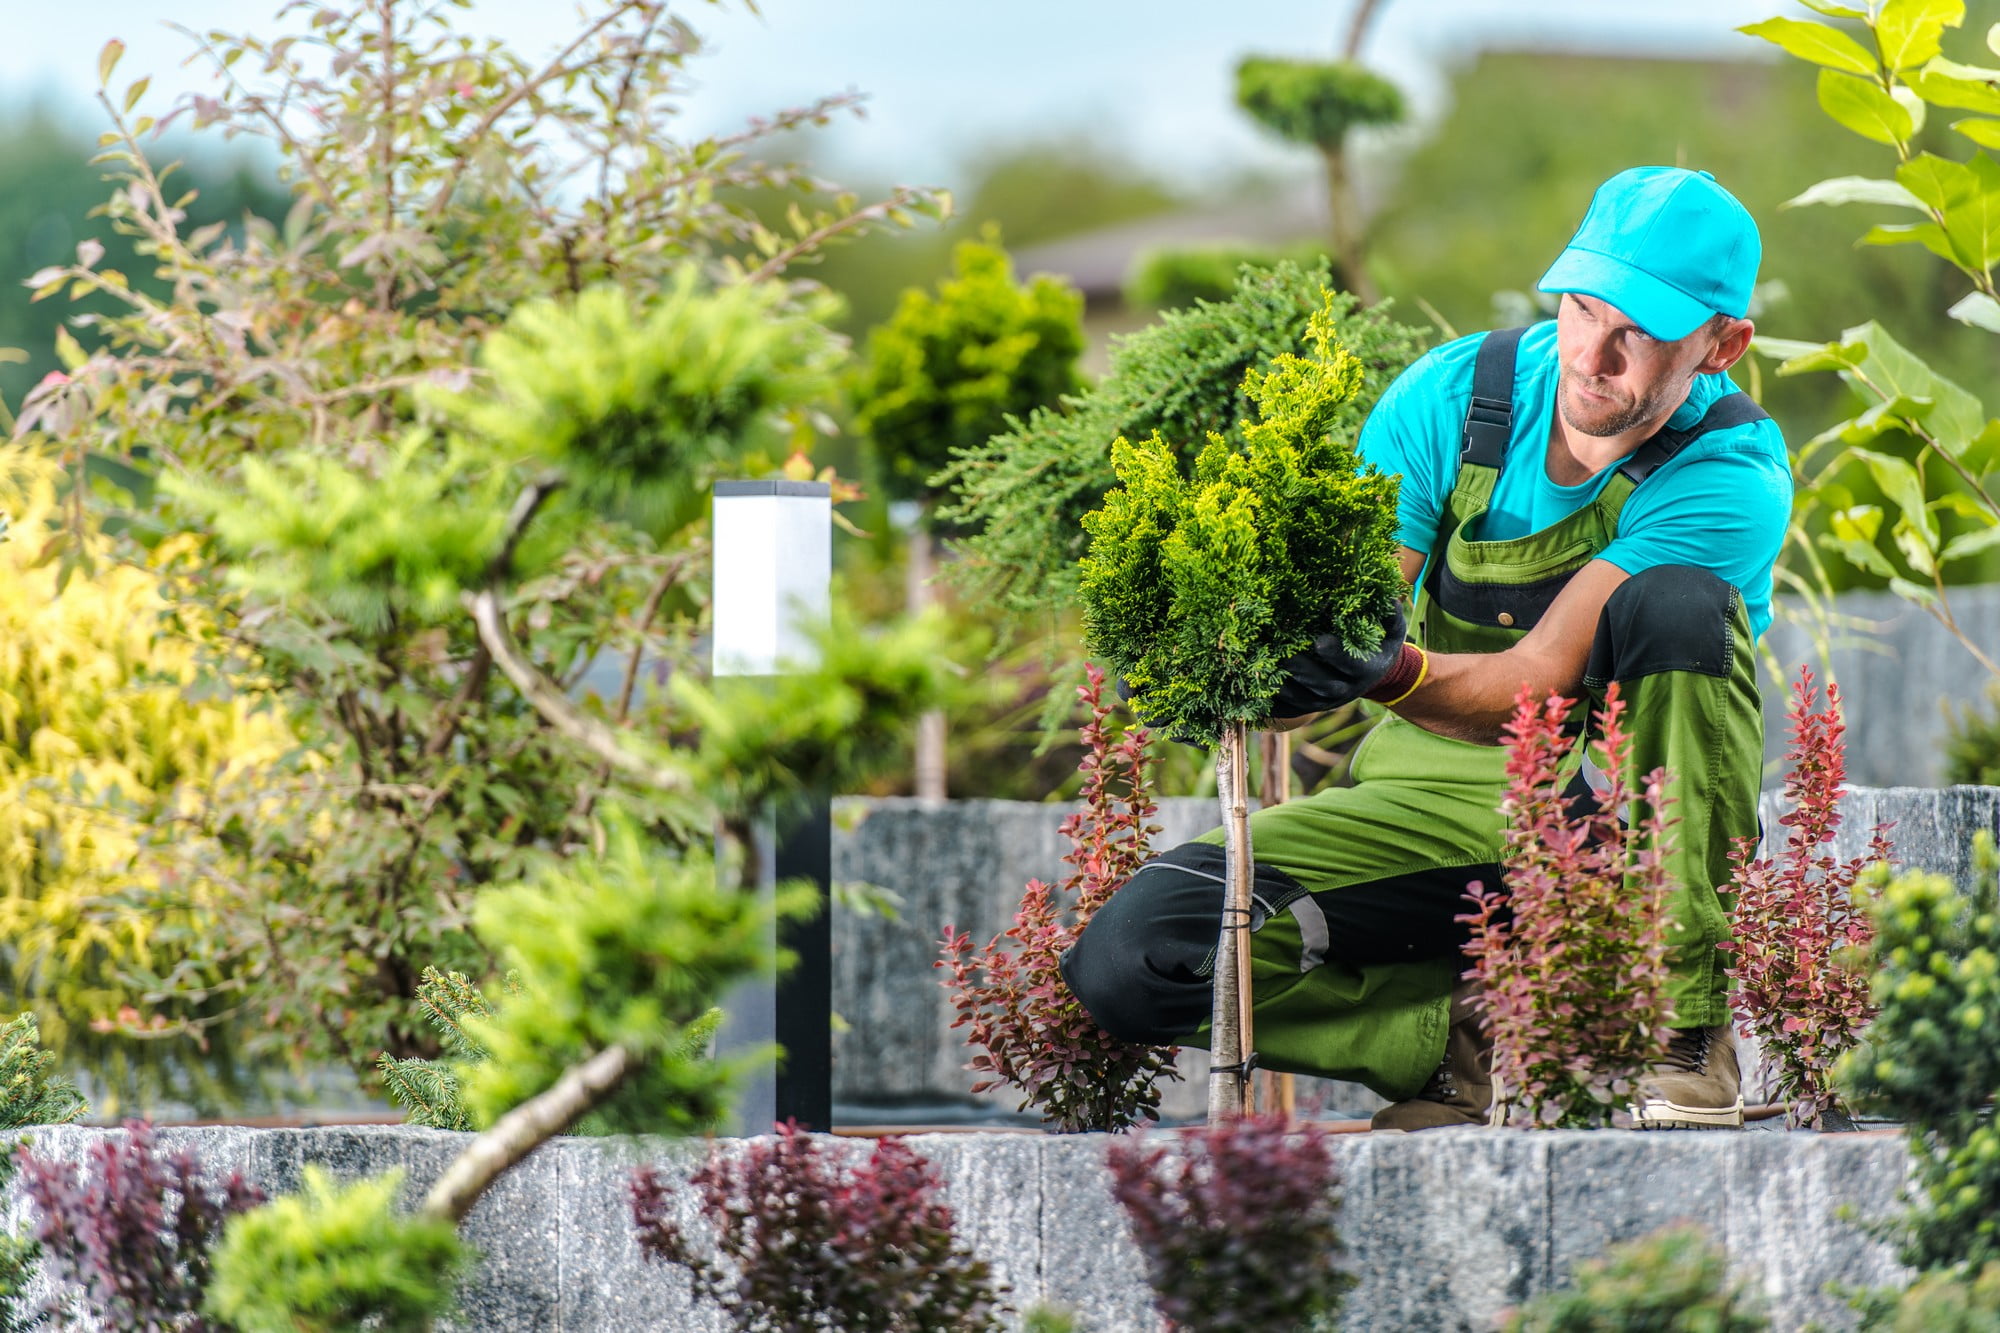 The image shows a person engaging in gardening. They are wearing a bright blue cap, a blue t-shirt, and green overalls, and are kneeling while tending to a small, bushy plant. The person appears to be a professional gardener or landscaper, as their attire includes work gloves and they seem to be very focused on the task at hand. They are surrounded by various plants and shrubs, suggesting that they are working in a garden or a landscaped area. The environment is filled with greenery and some flowering plants, showcasing a range of colours and textures that contribute to the aesthetic of the space.